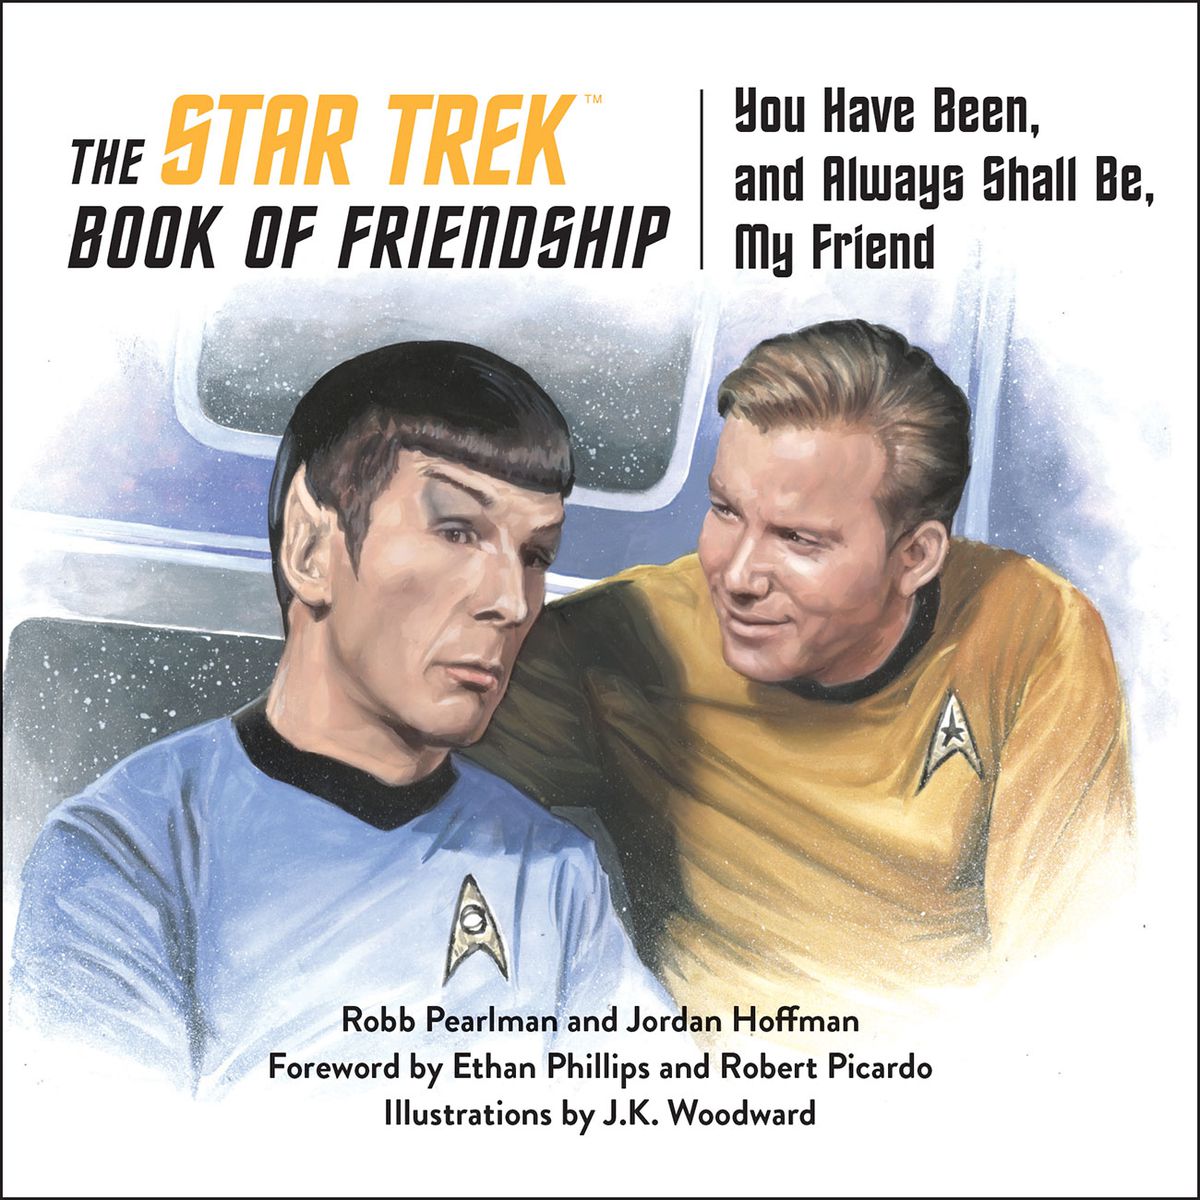 Picture of Captain Kirk smiling at the skeptical Mr. Spock on the cover of the Star Trek Book of Friendship. 